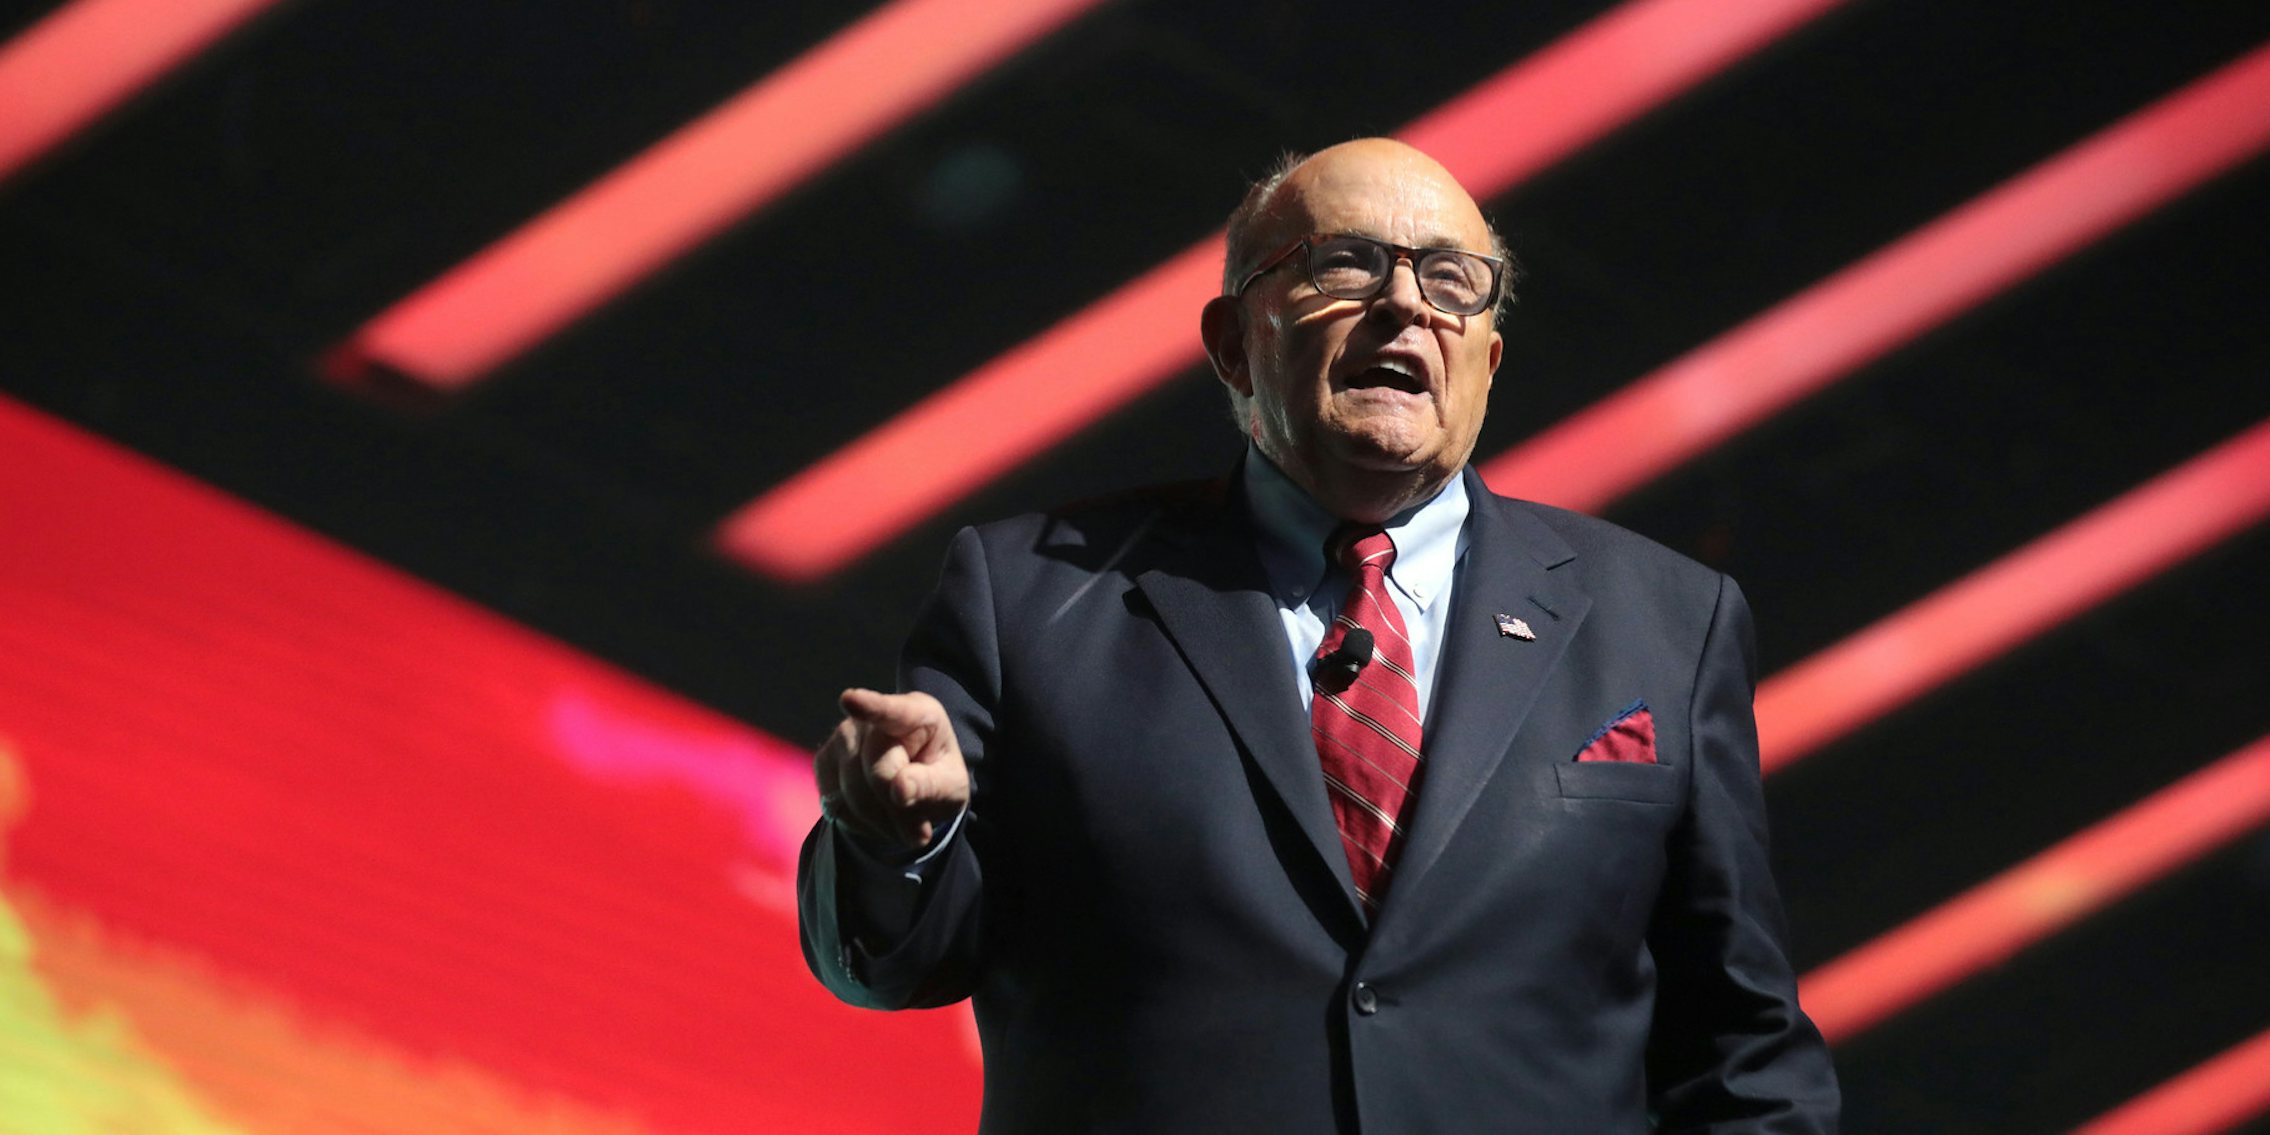 Rudy Giuliani. Dominion Voting Systems filed a lawsuit against Giuliani accusing him of defamation.